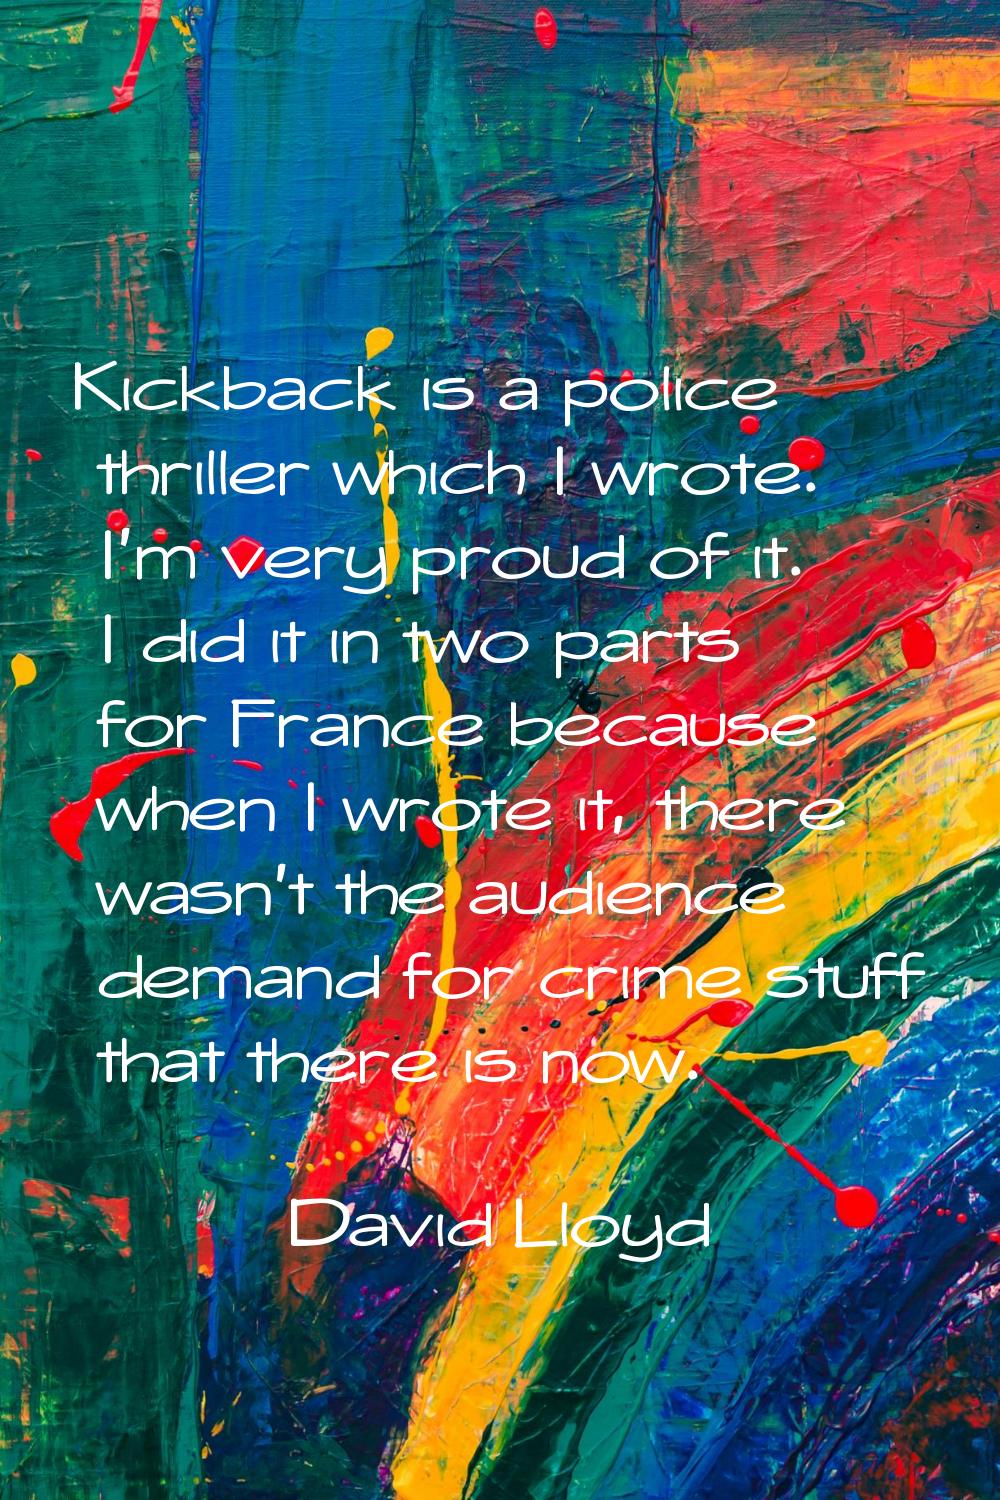 Kickback is a police thriller which I wrote. I'm very proud of it. I did it in two parts for France